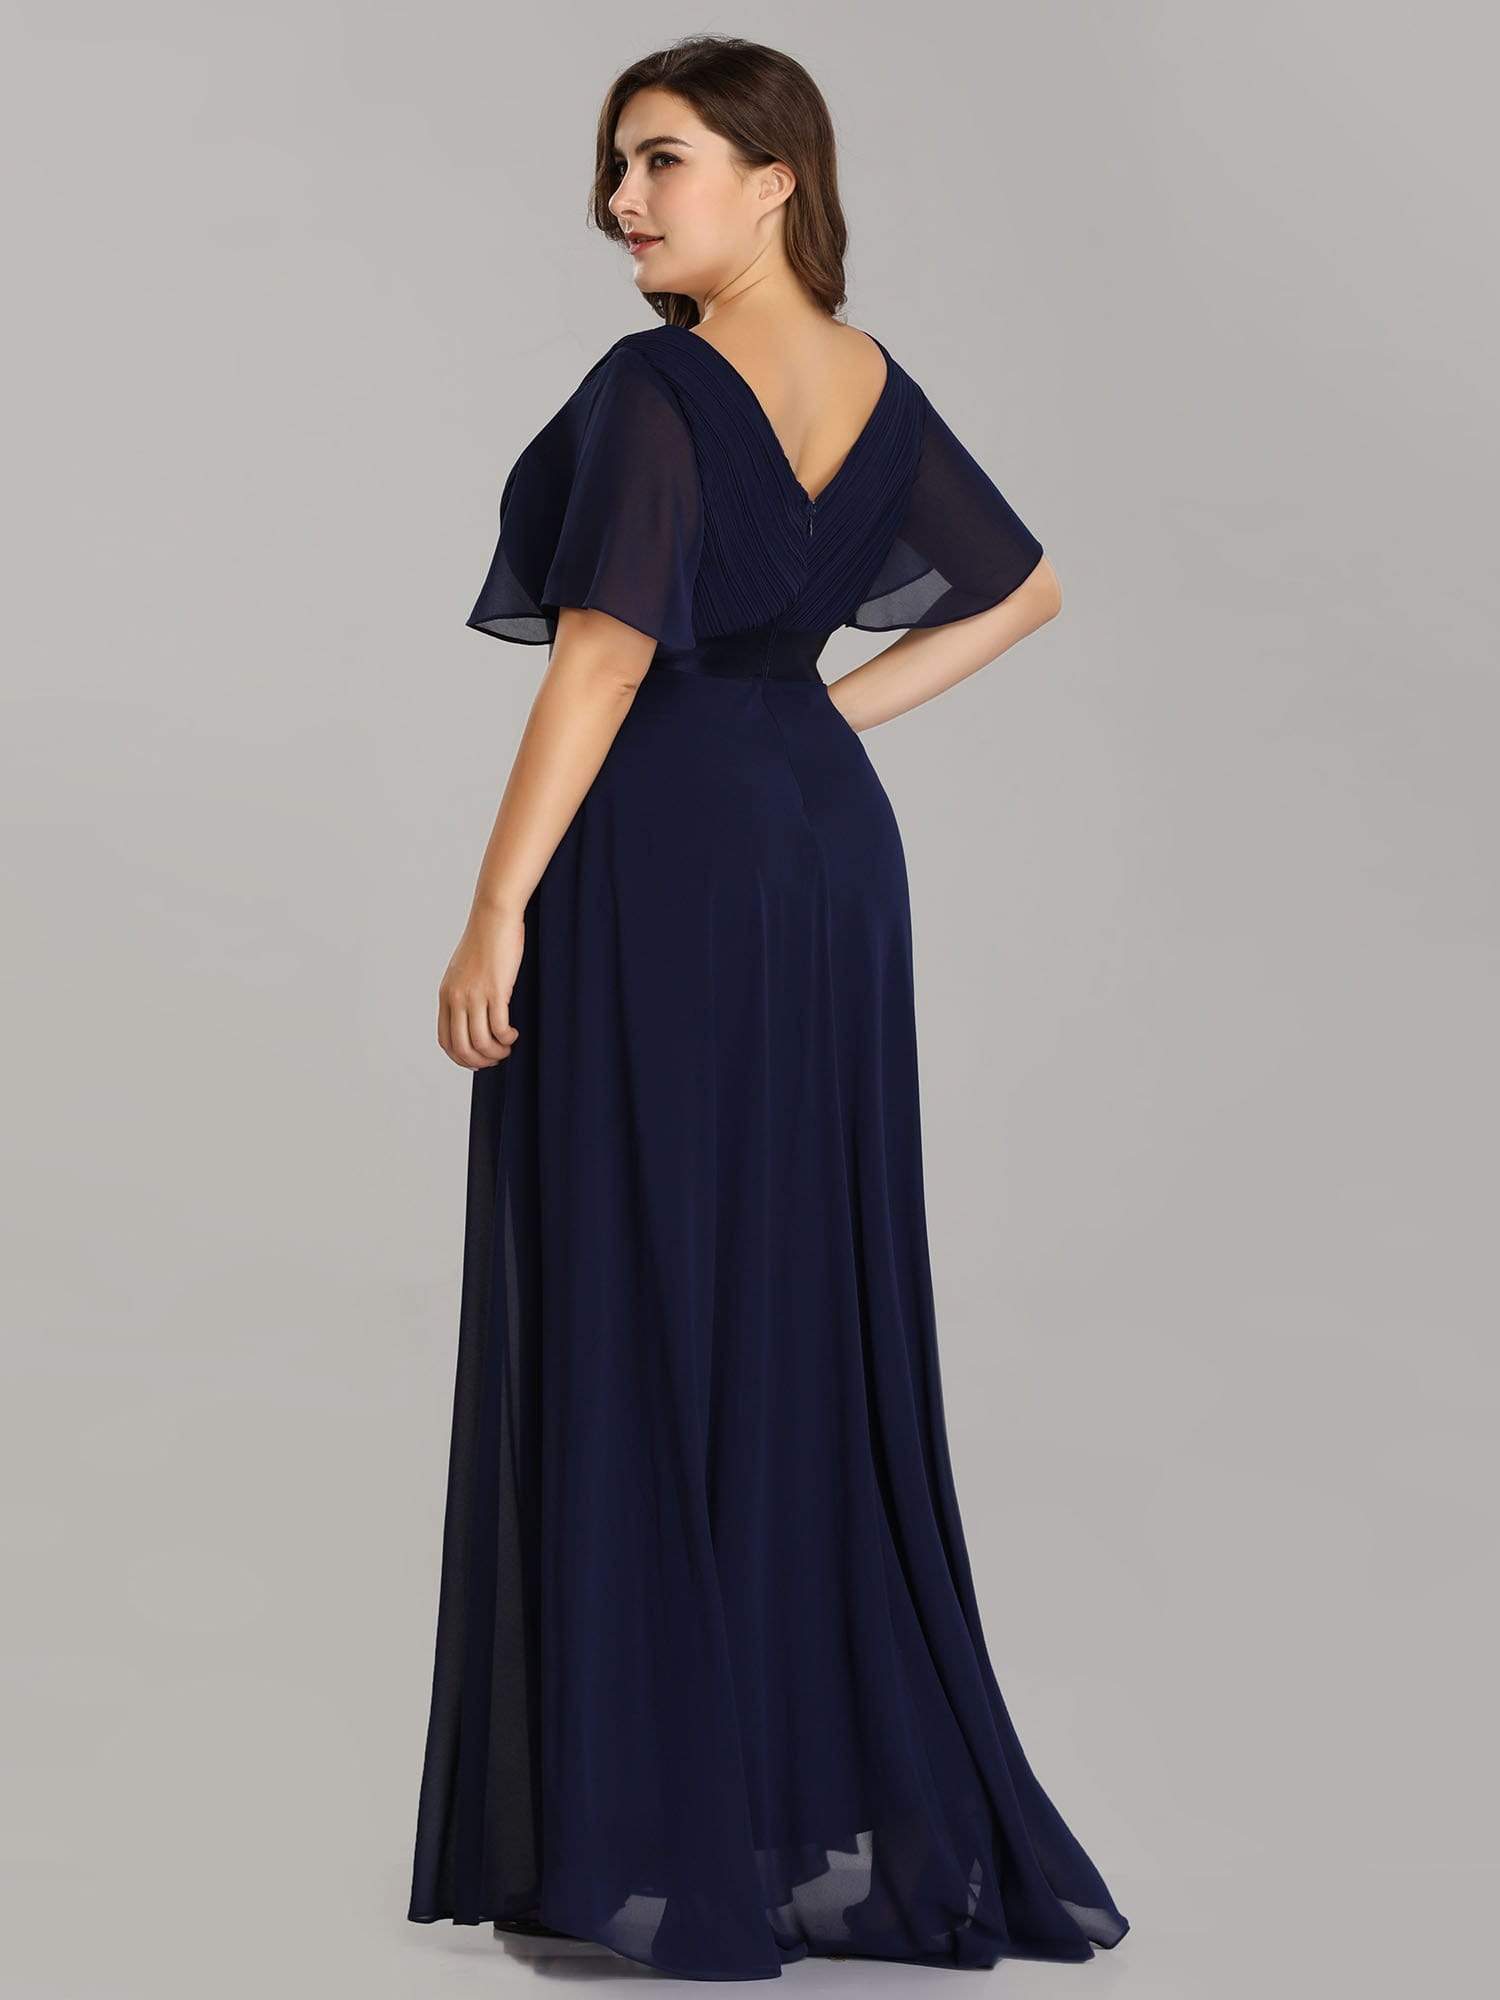 COLOR=Navy Blue | Plus Size Long Empire Waist Evening Dress With Short Flutter Sleeves-Navy Blue 4